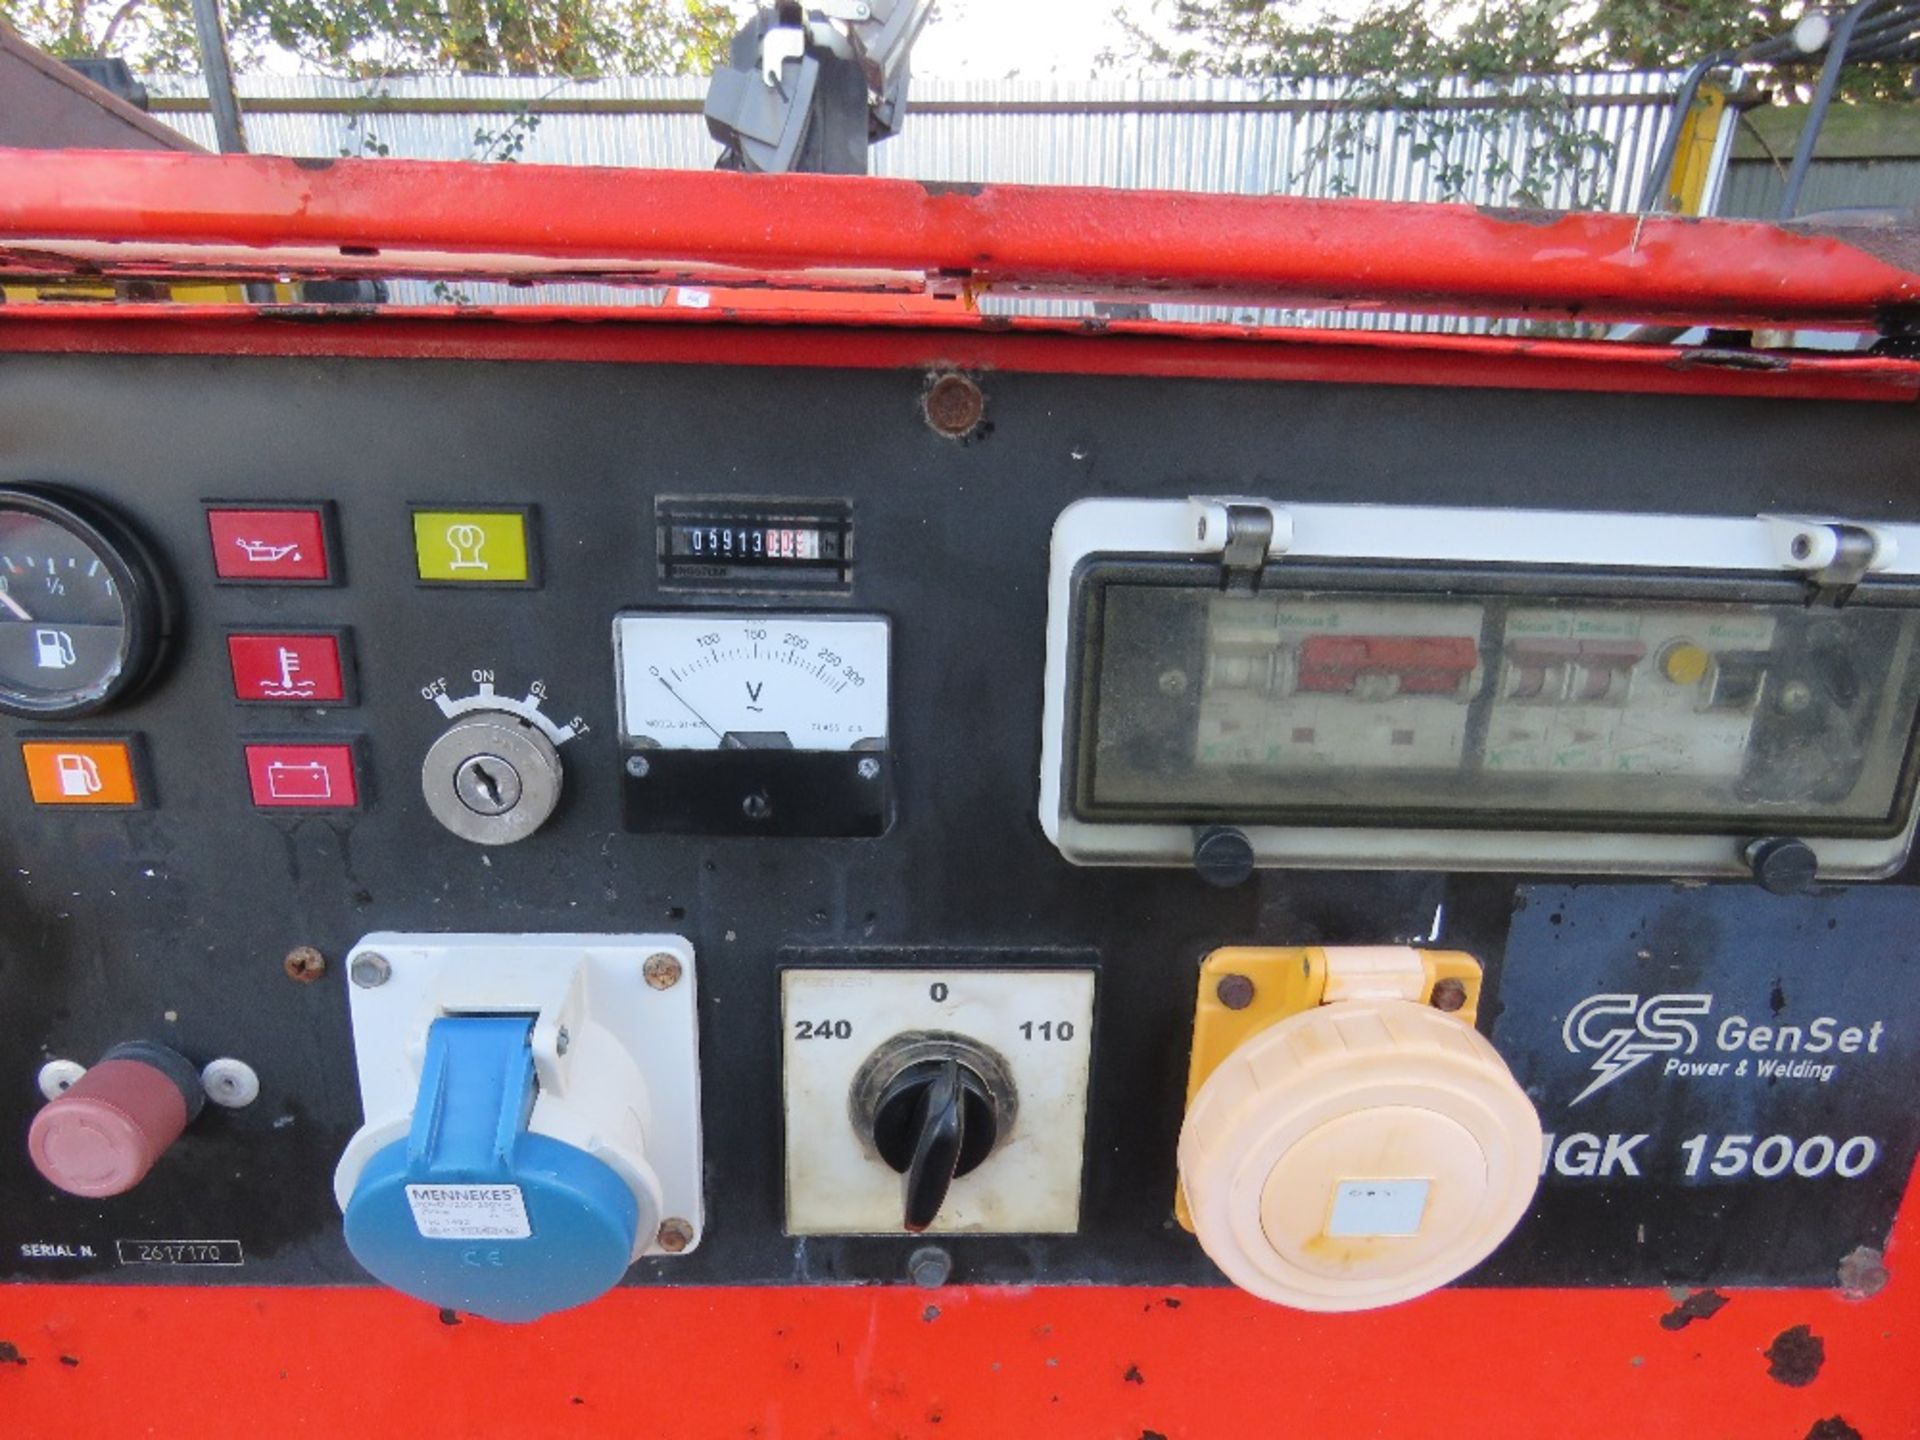 Kubota engined 15Kva towed generator set YEAR 2006 SN:2617170 WHEN TESTED WAS SEEN TO RUN - Image 4 of 6